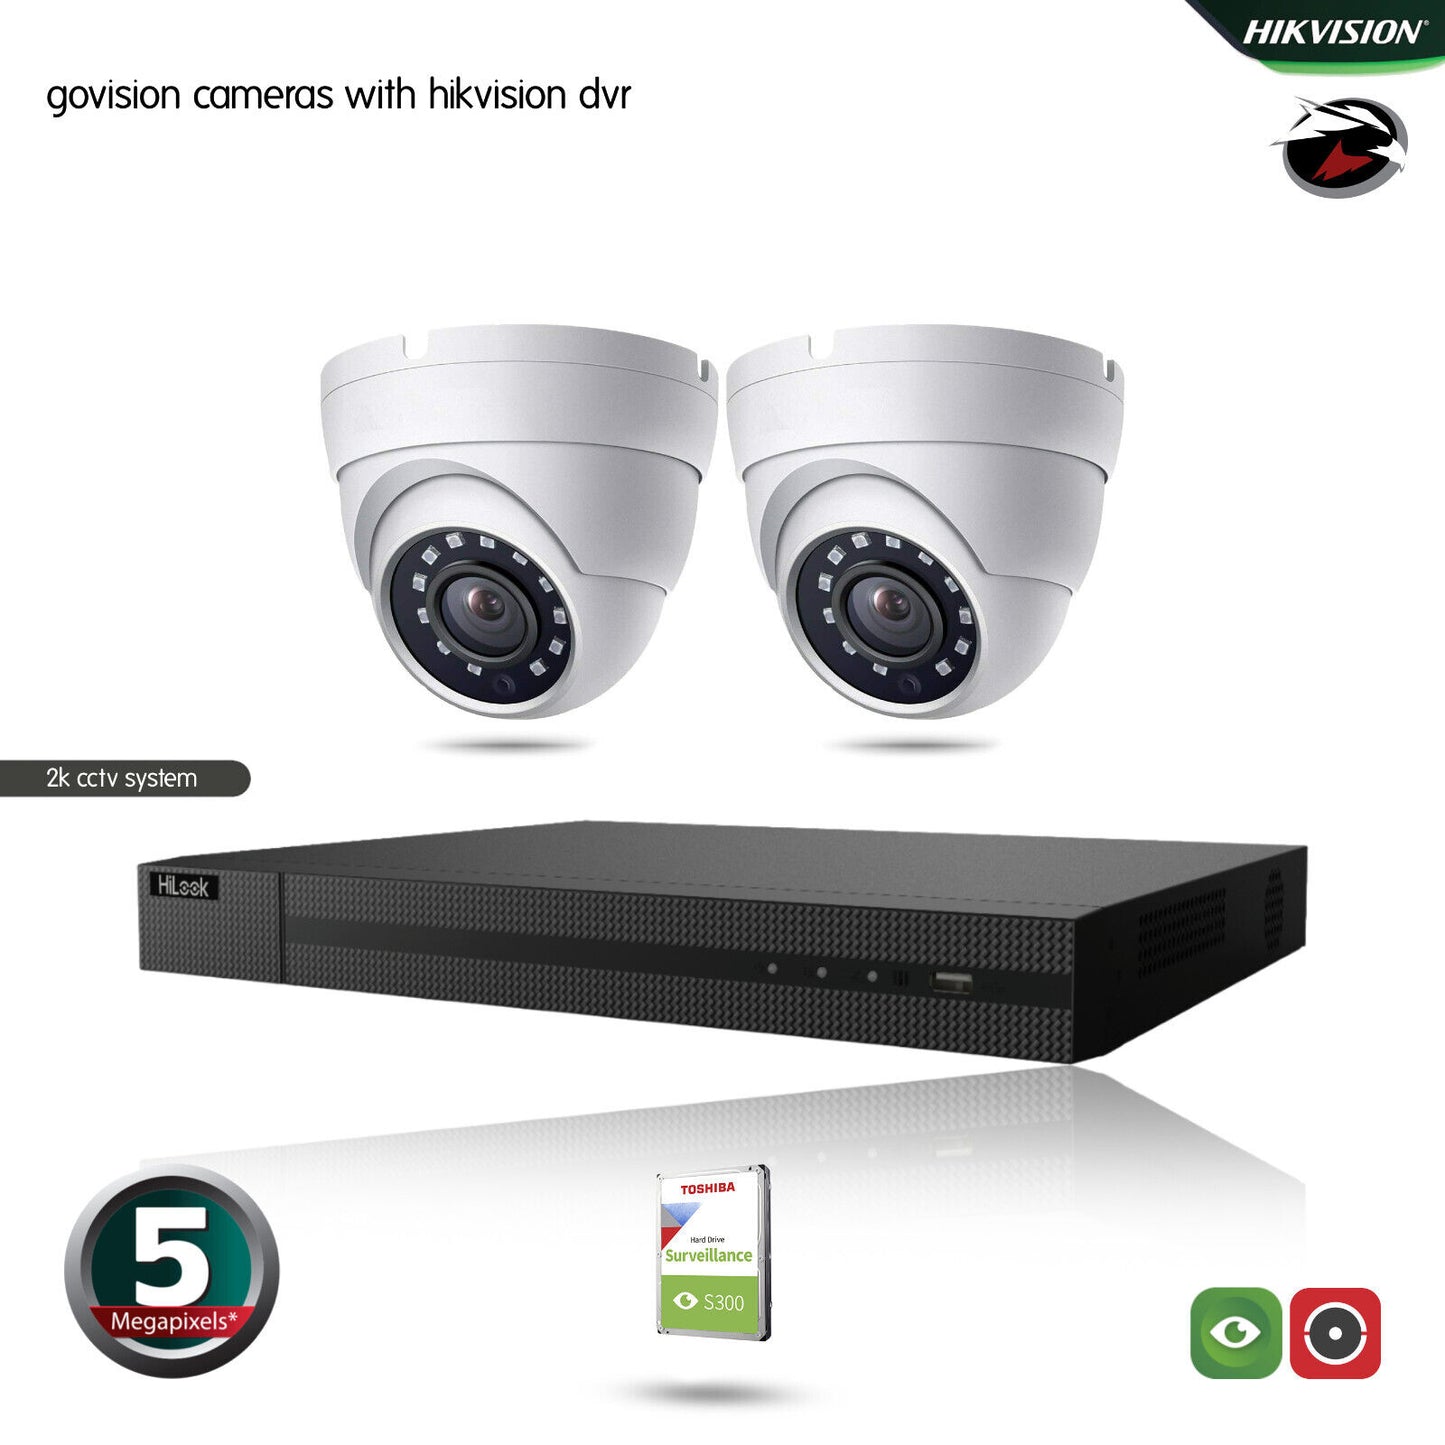 HIKVISION 5MP CCTV FULL HD NIGHT VISION OUTDOOR DVR HOME SECURITY SYSTEM KIT UK 4CH DVR 2xCameras (white) 2TB HDD